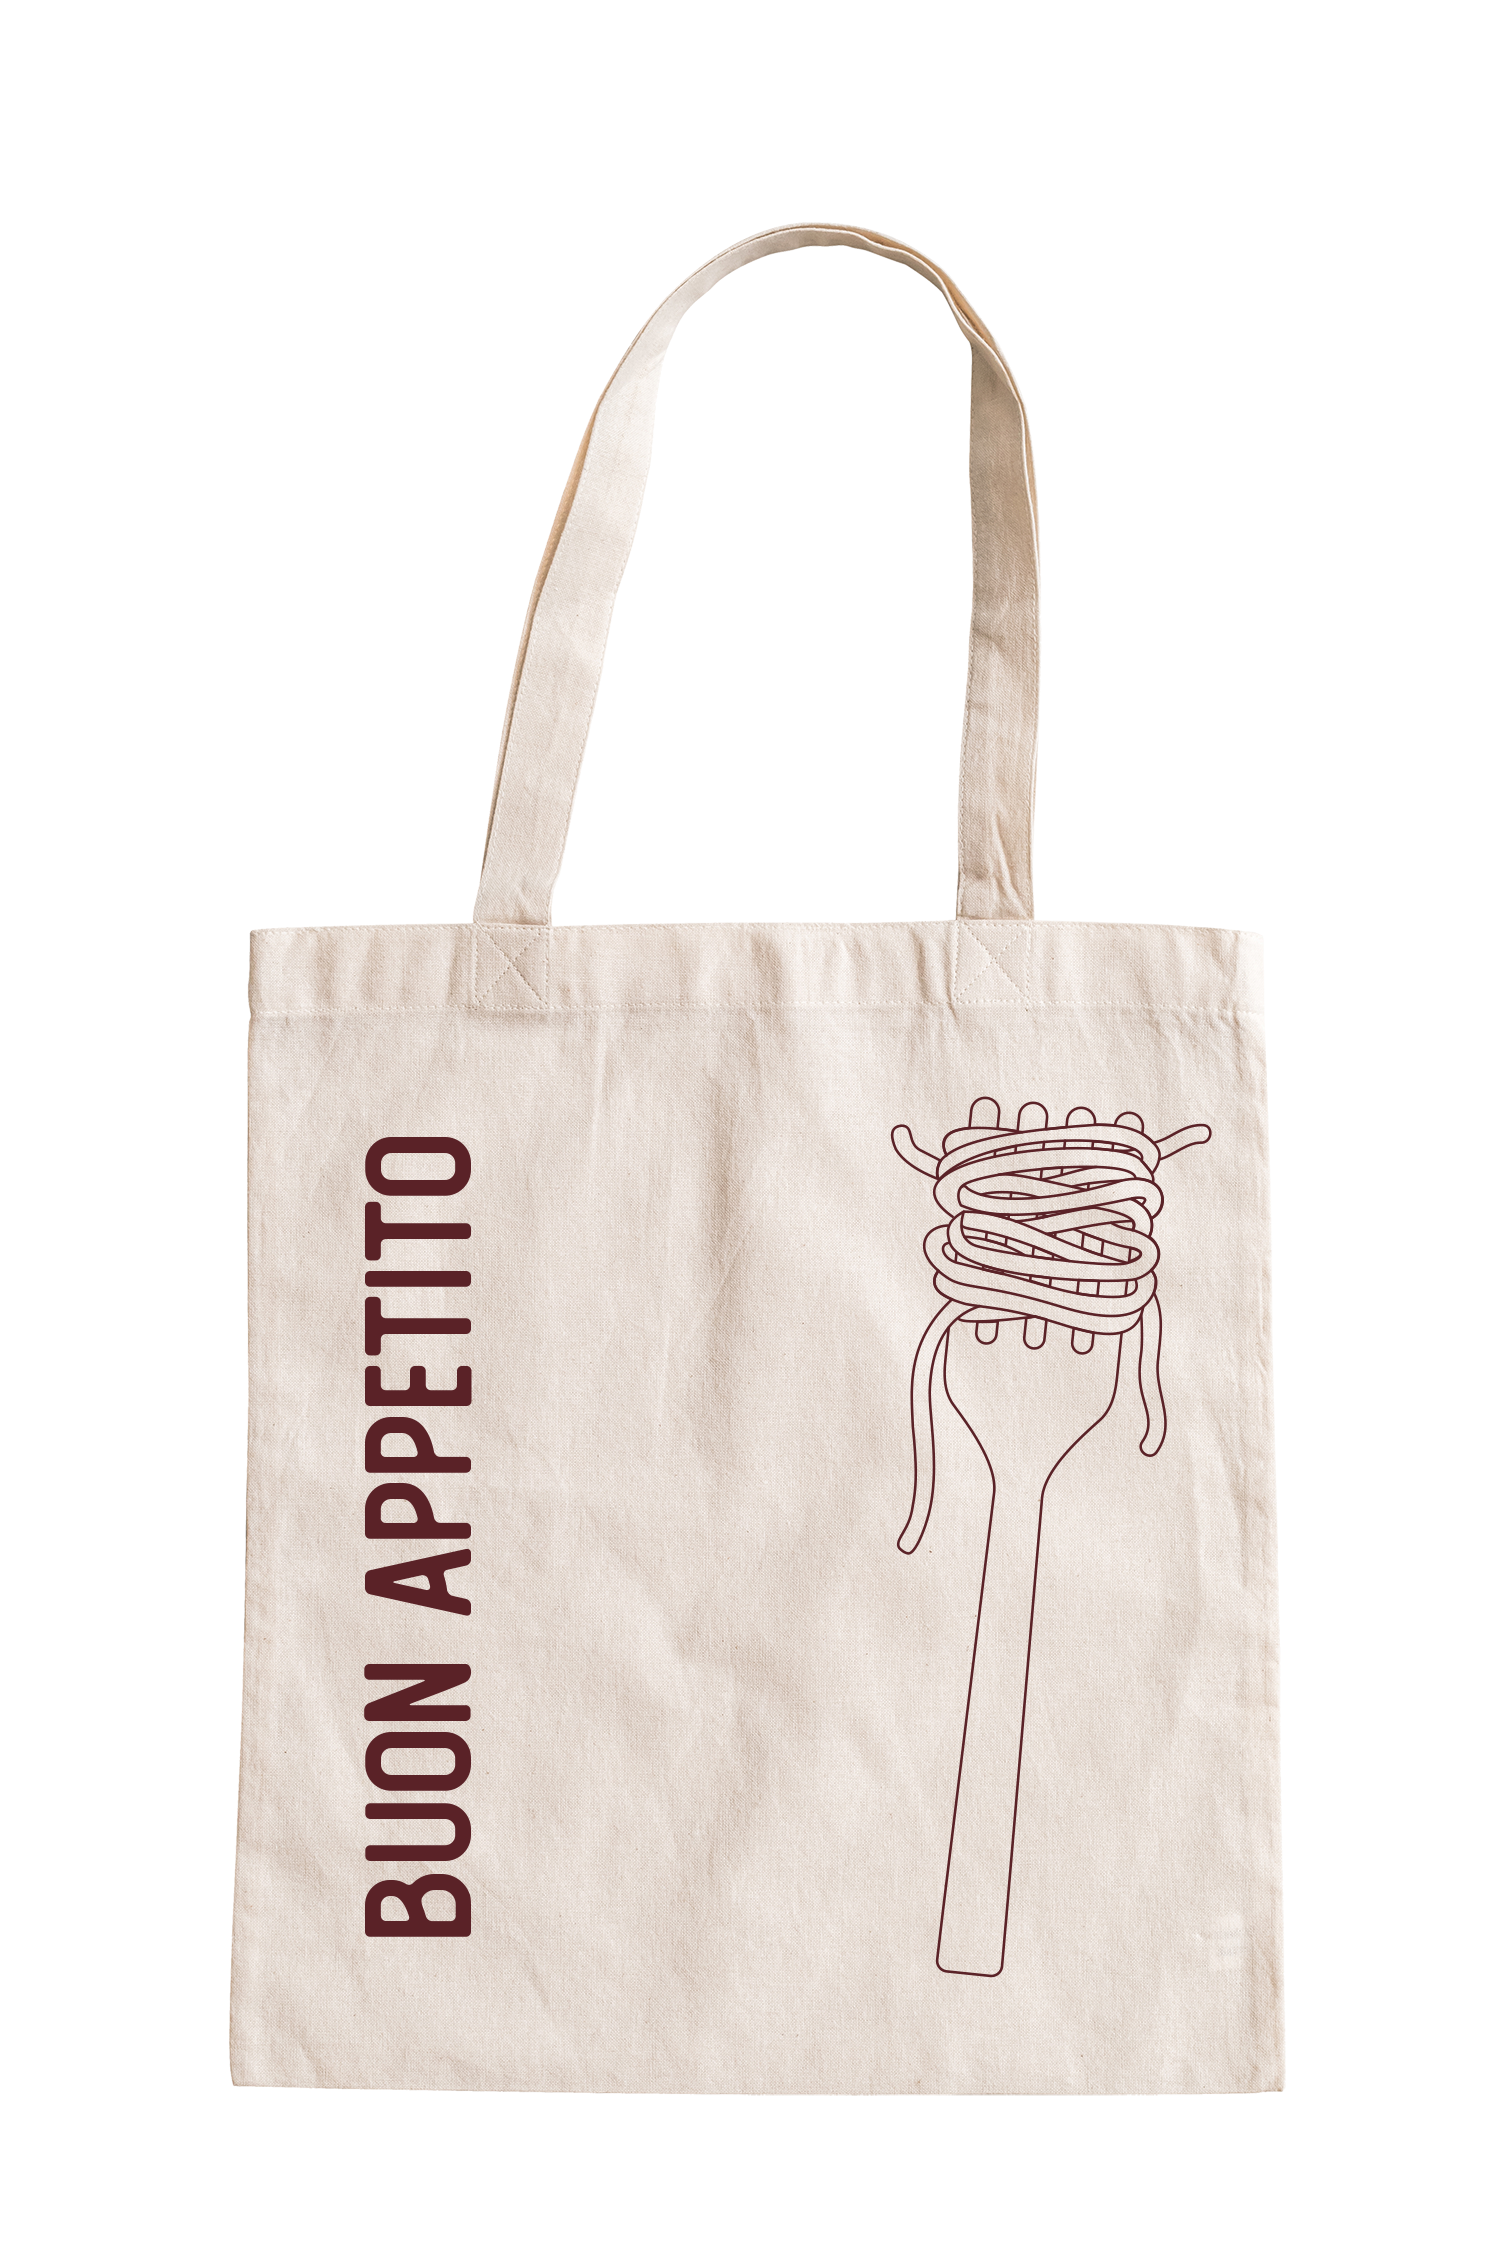 Featured image for “Buon Appetito Tote Bag”